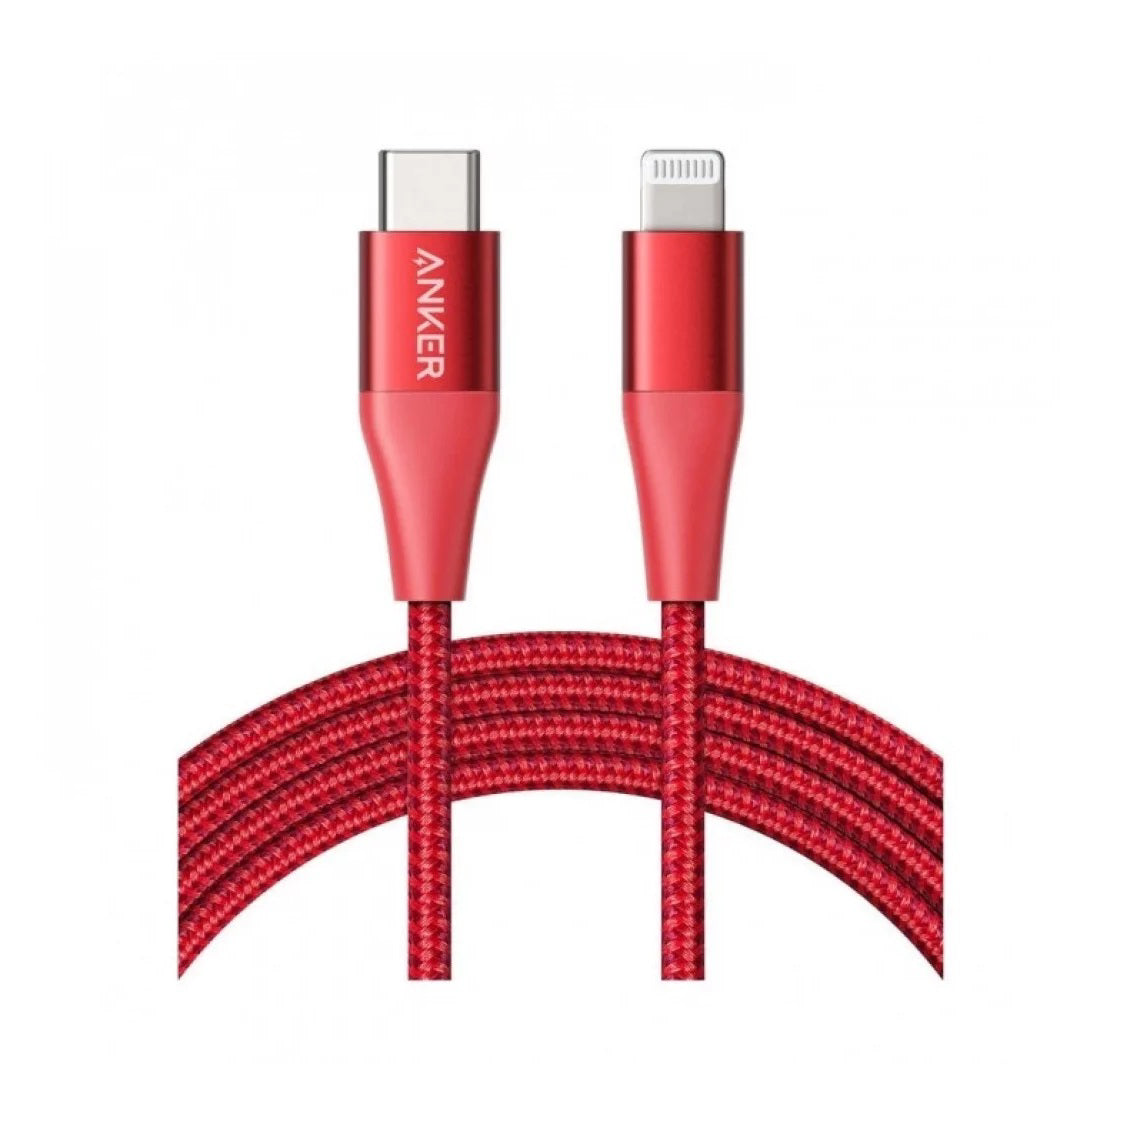 ANKER POWERLINE+ II 1.8M USB-C TO LIGHTNING CABLE - RED